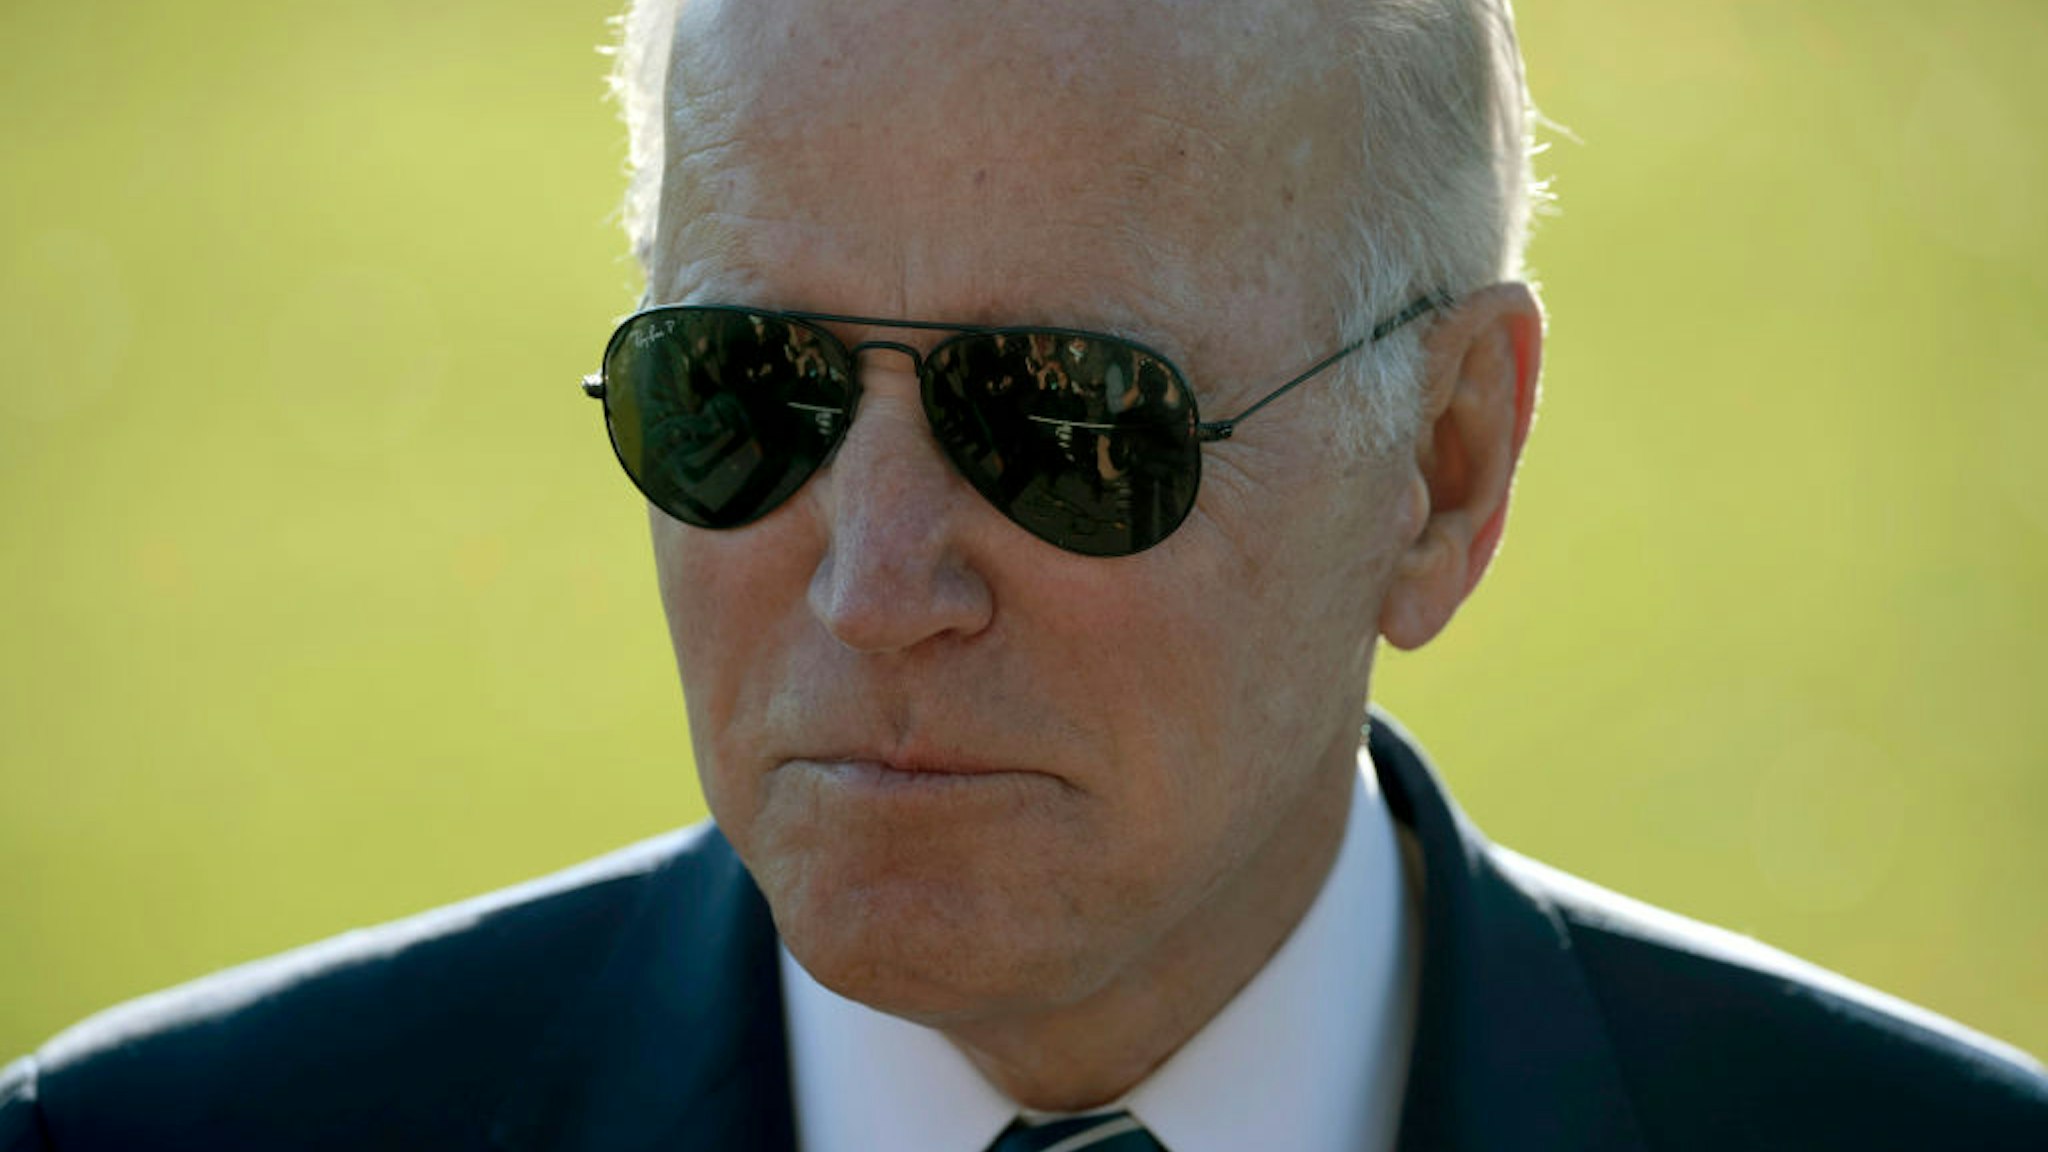 U.S. President Joe Biden speaks to reporters after returning to the White House from Walter Reed Medical Center on November 19, 2021 in Washington, DC.